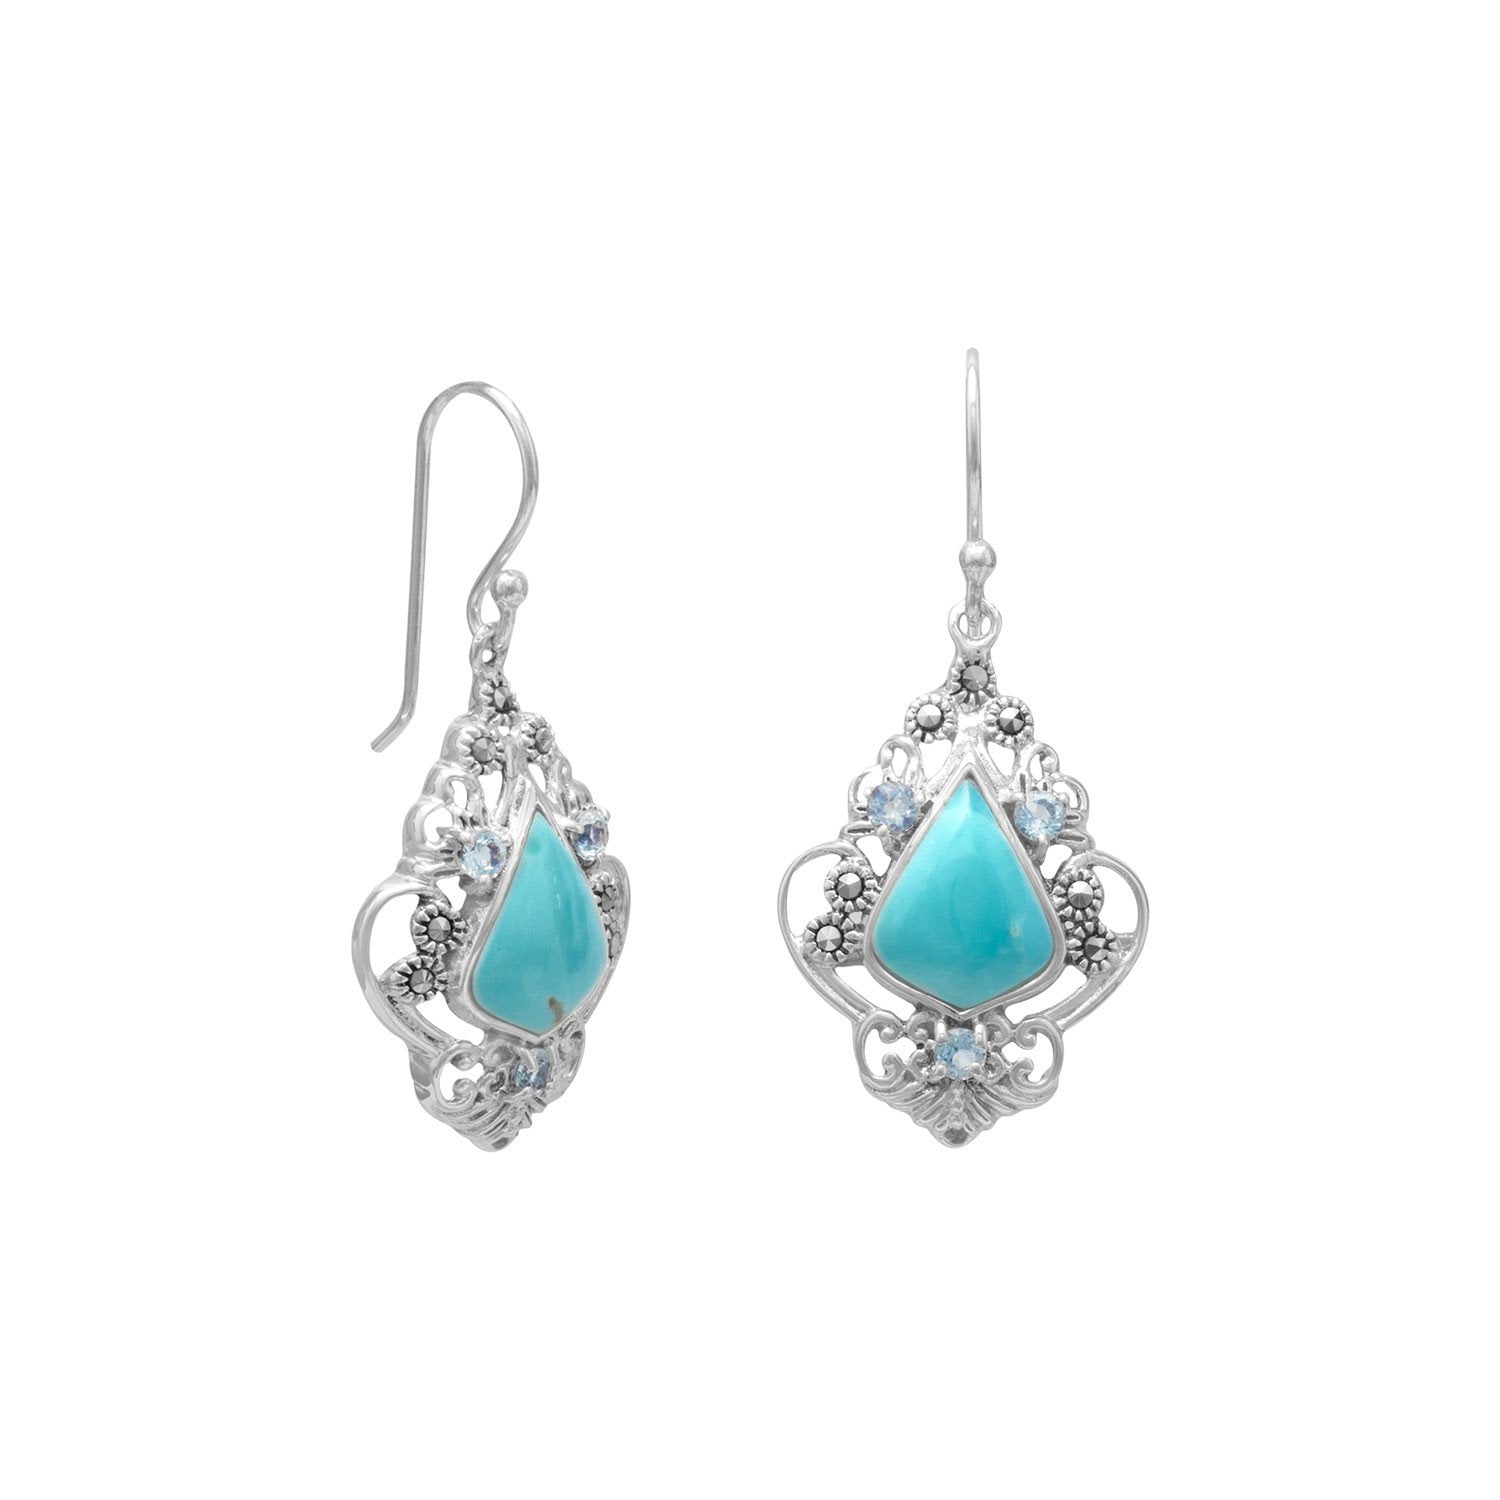 Reconstituted Turquoise, Blue Topaz and Marcasite Earrings - Joyeria Lady